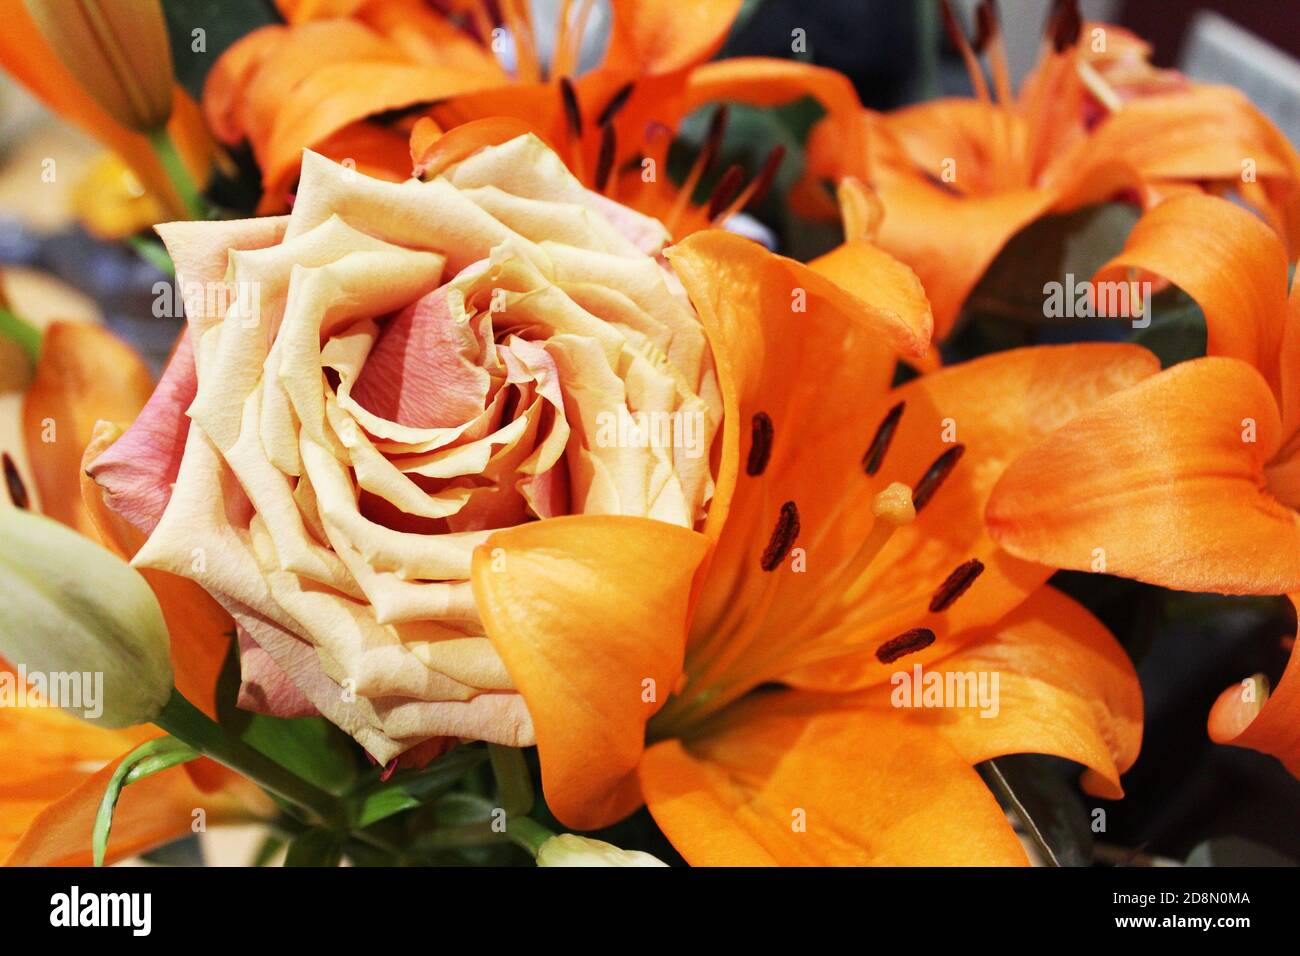 Close up orange rose (Rosa) in a bunch/bouquet of Orange County king lilies (Lilium), orange flowers Stock Photo